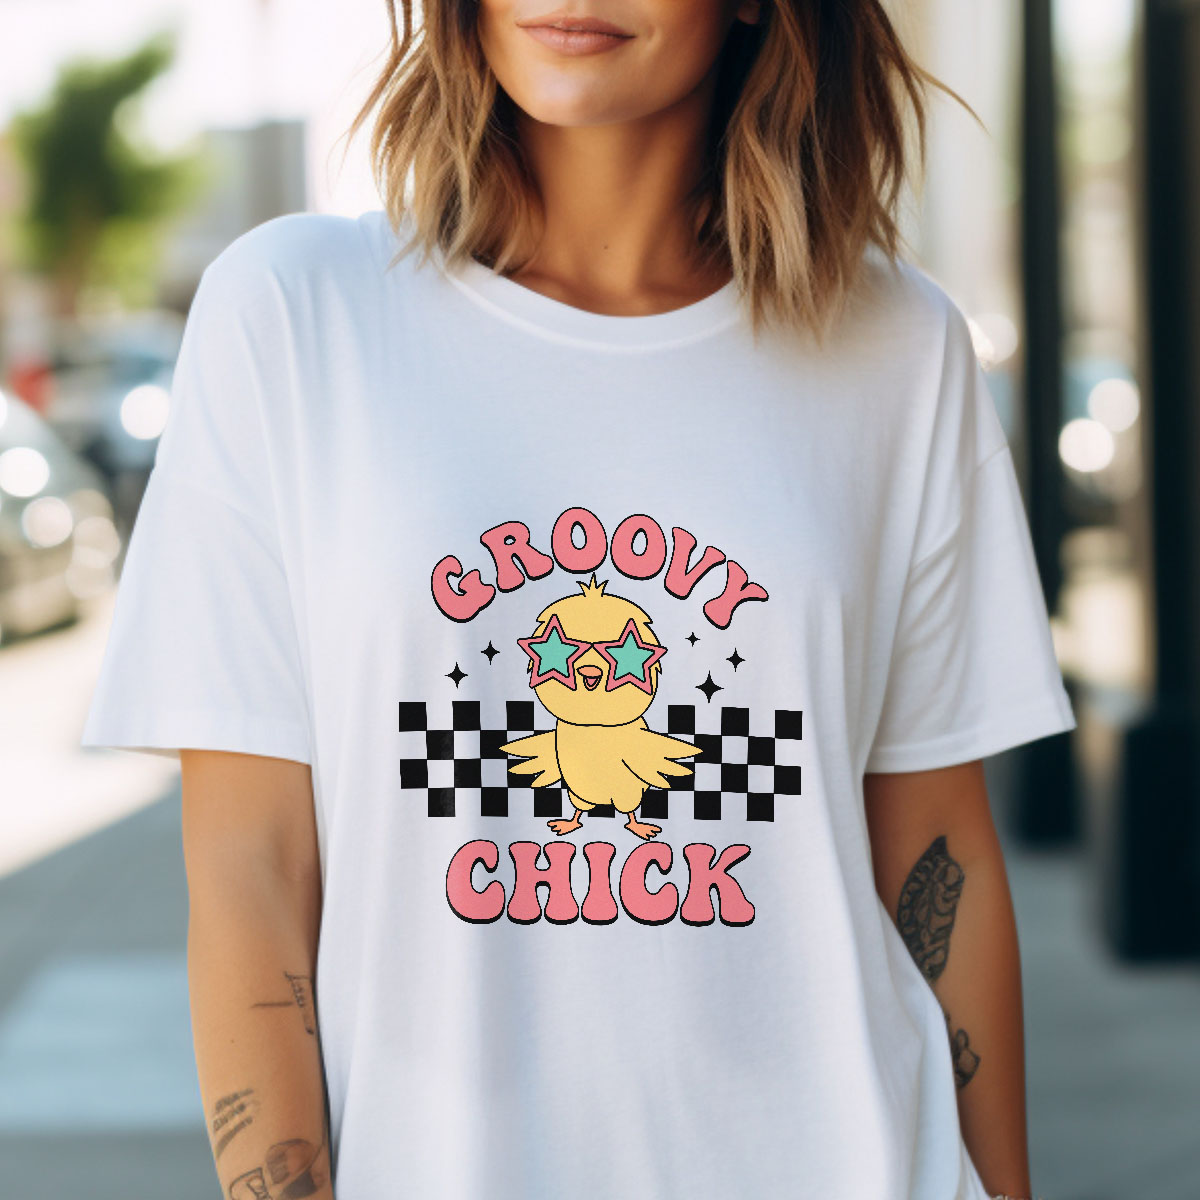 T-Shirt 'Groovy Chick' Personalizzabile Regali per Lei Regali per un'Amica Regali per la Sorella